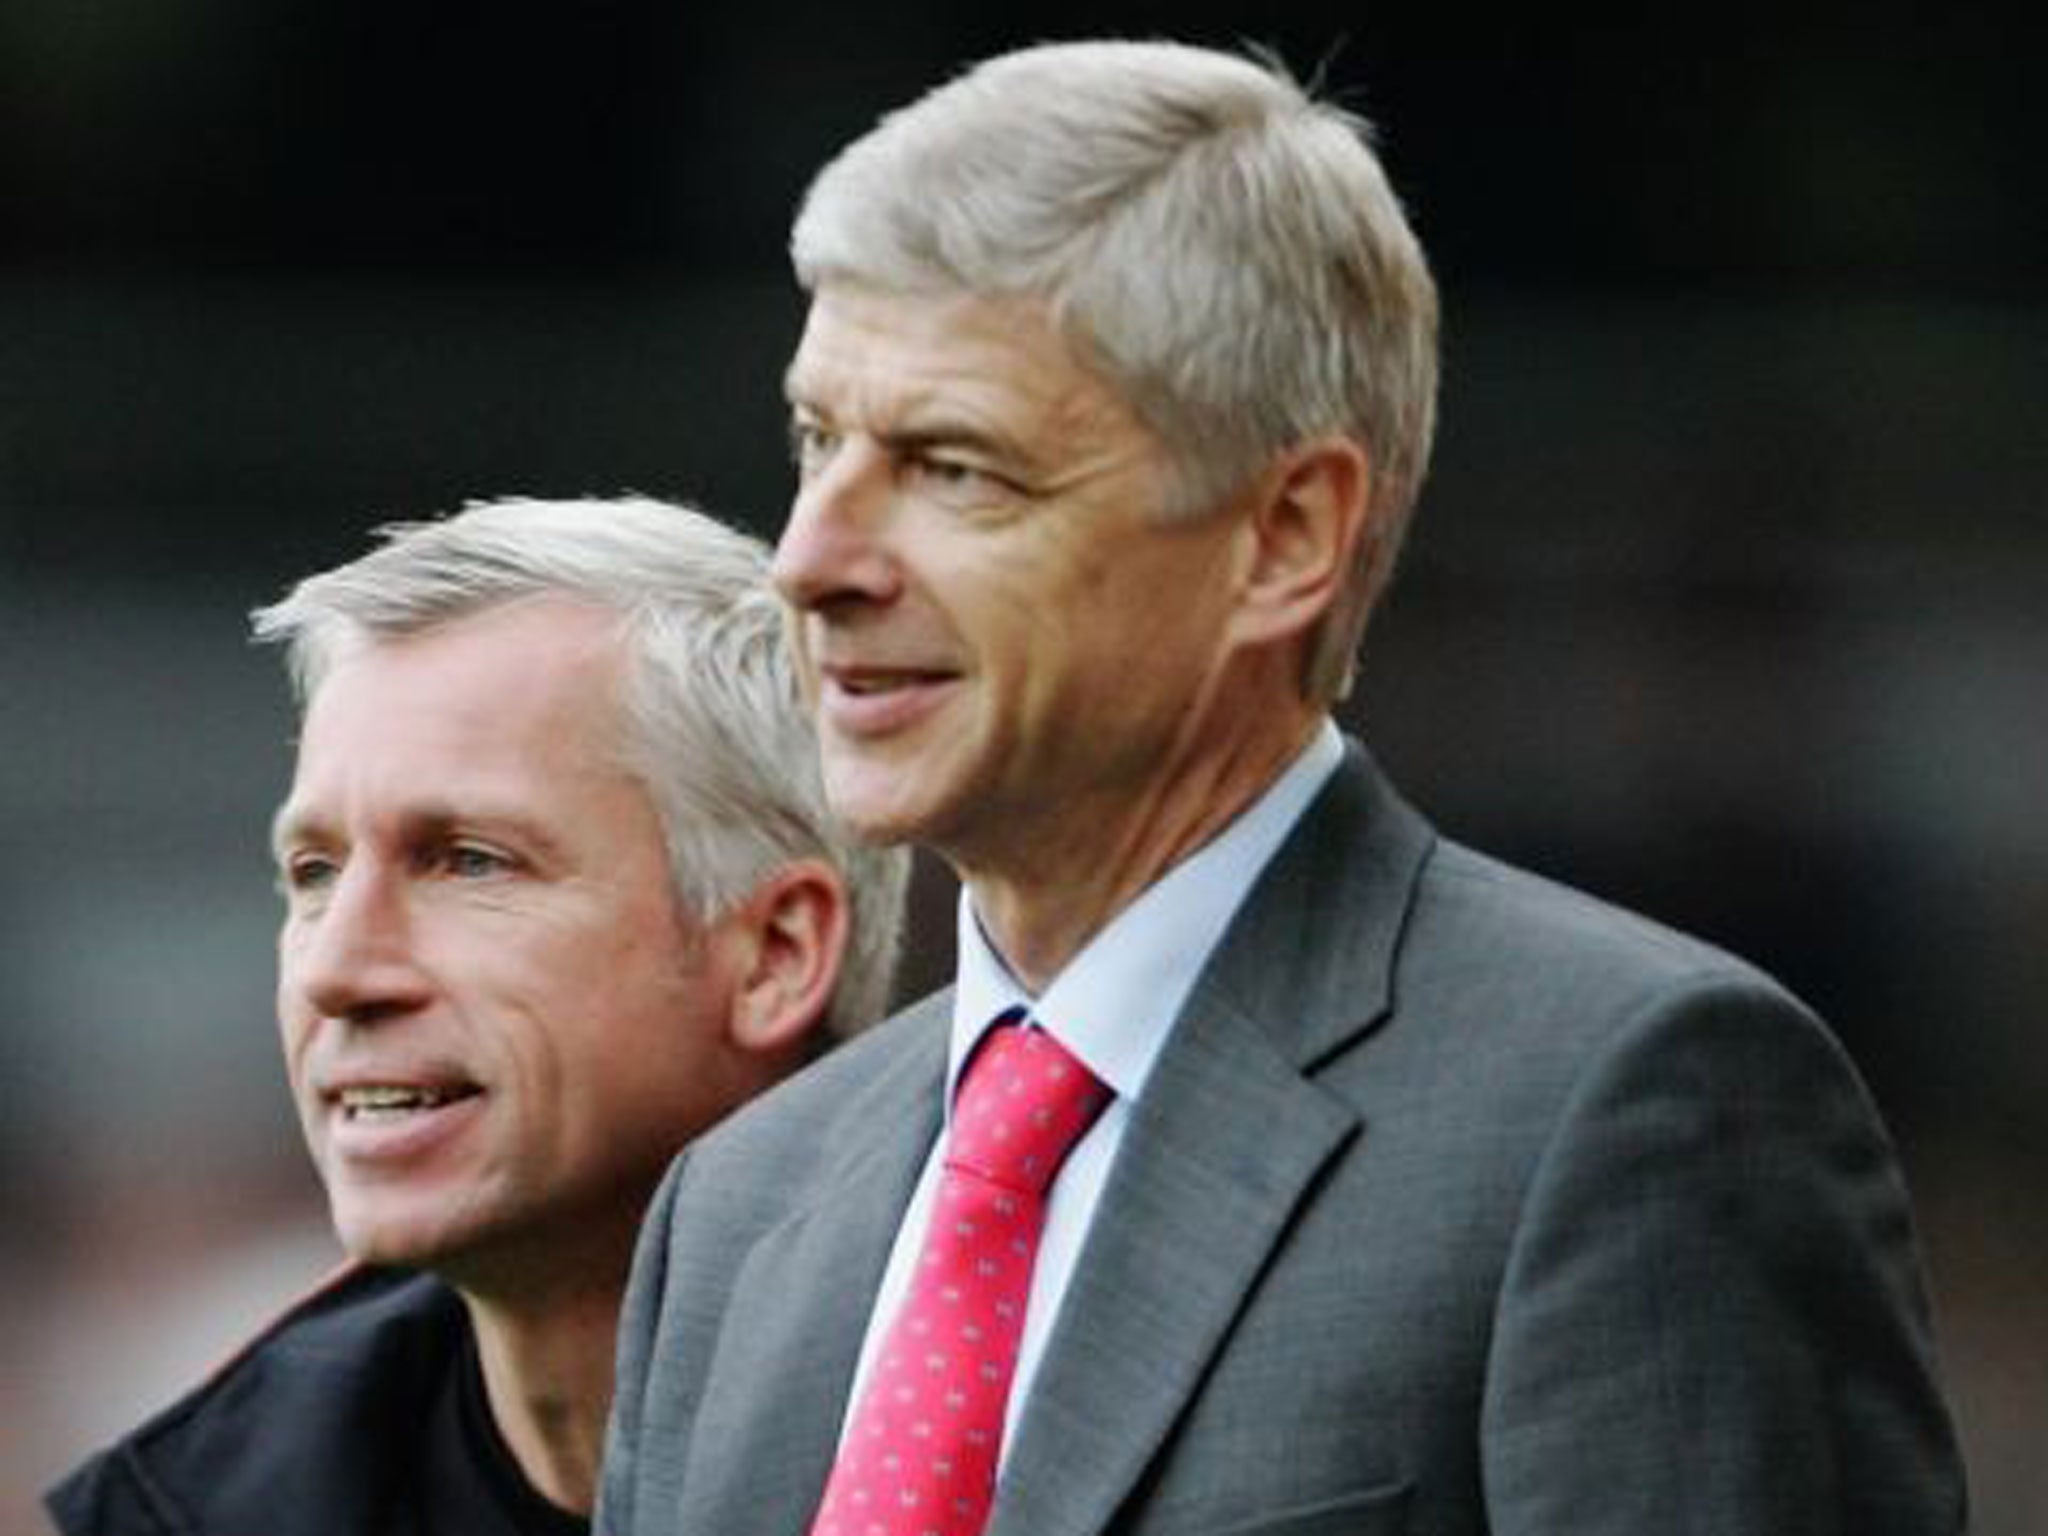 Alan Pardew S Frenchmen Follow In Fashionable Footsteps Of Arsene Wenger The Independent The